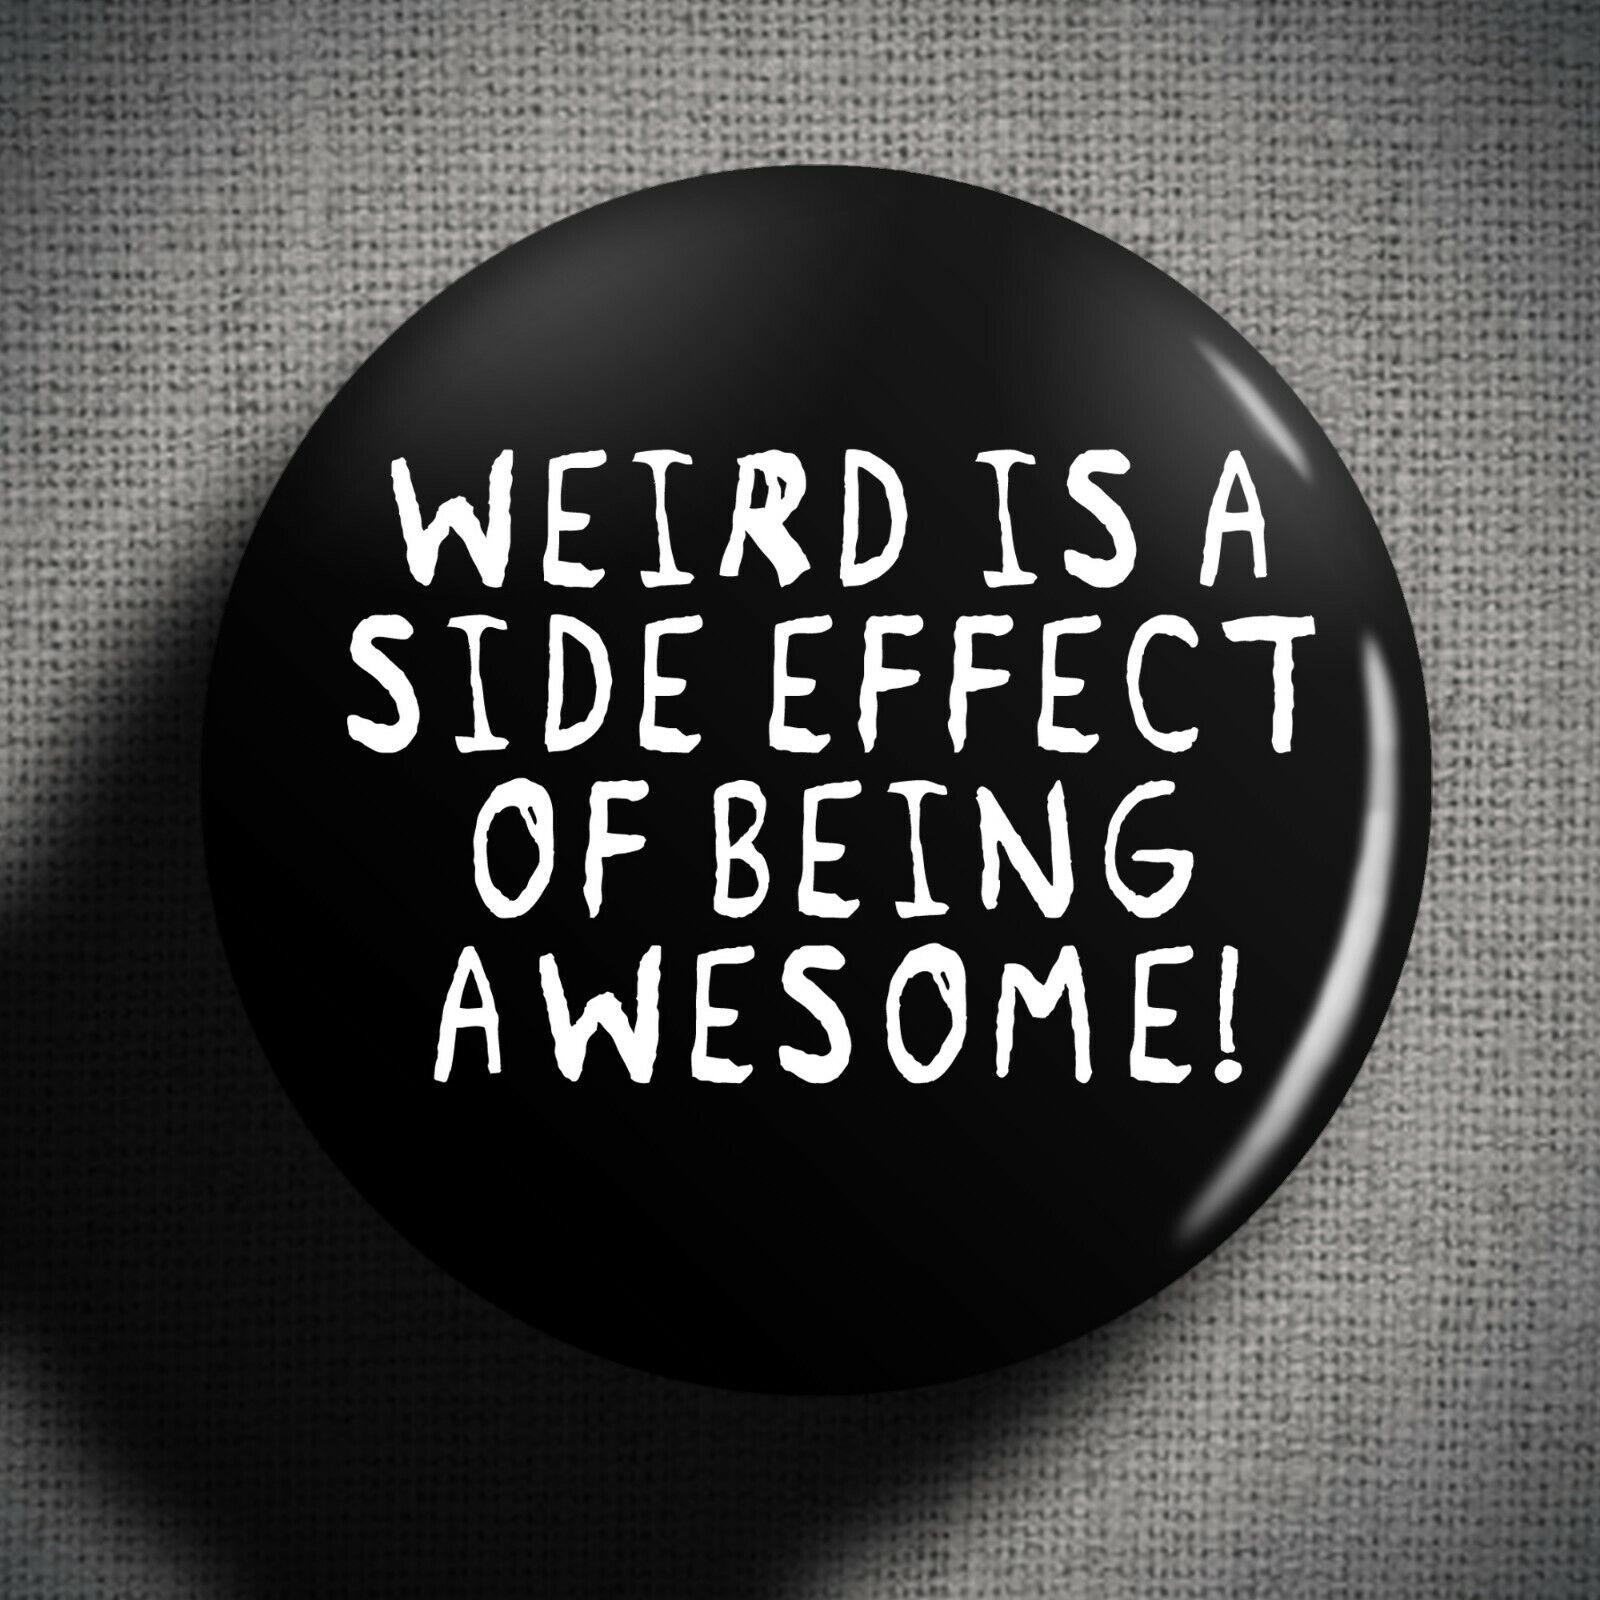 WEIRD IS A SIDE EFFECT Pin Badge Button (25mm 1 inch) Awesome Funny Saying Nerd